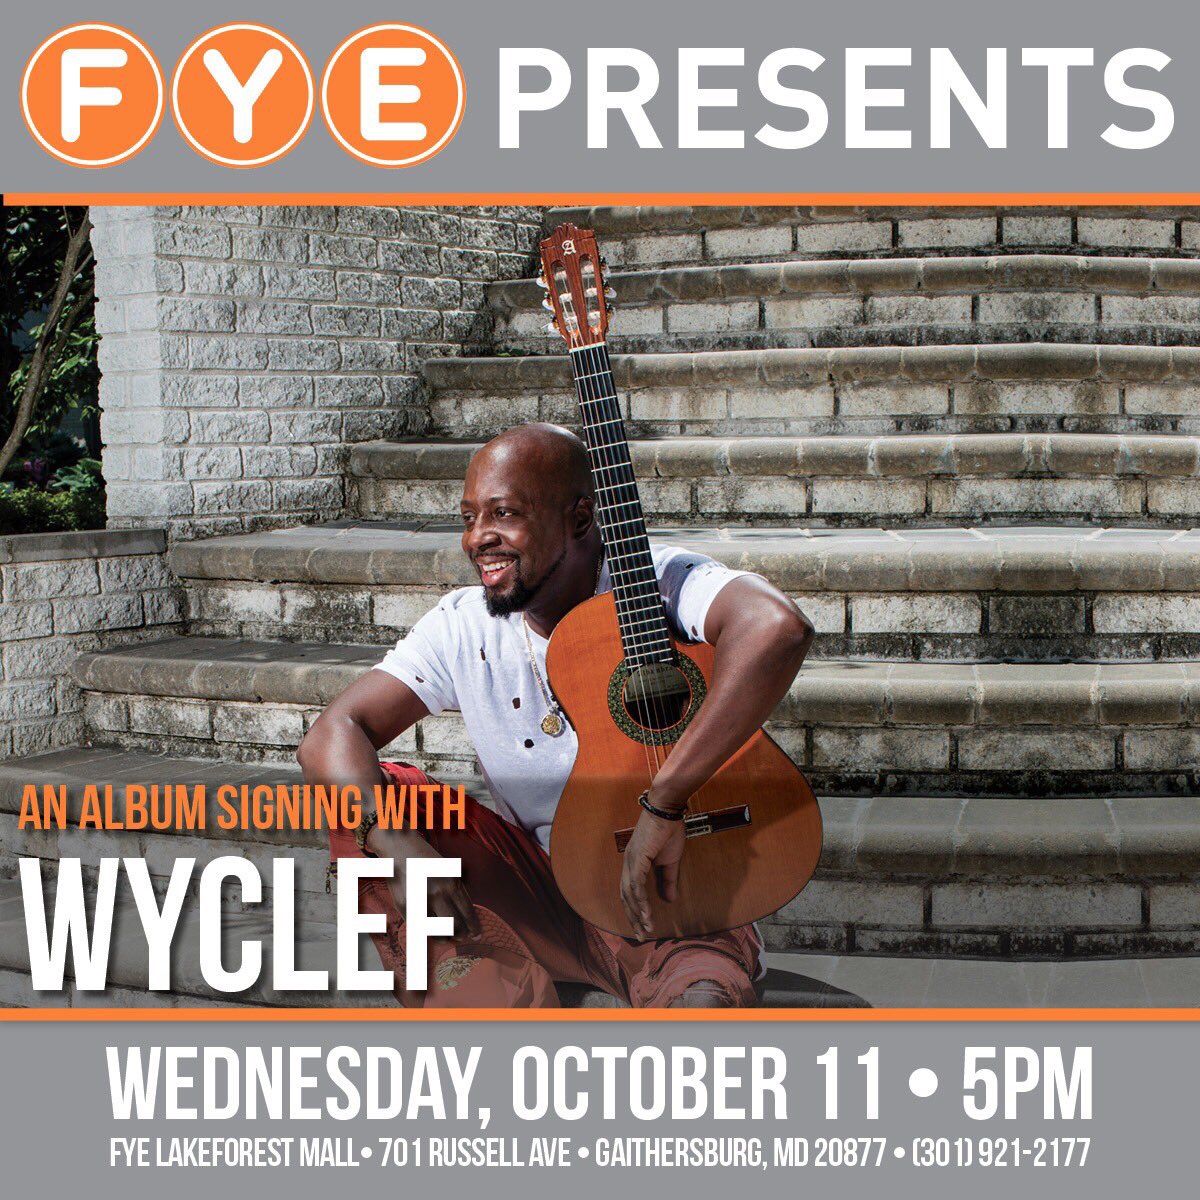 DMV area, I’m on my way to FYE right now !!!!Come see me at FYE in Lake Forest Mall from 5-6 PM ???????????? https://t.co/eXREqjcDaY